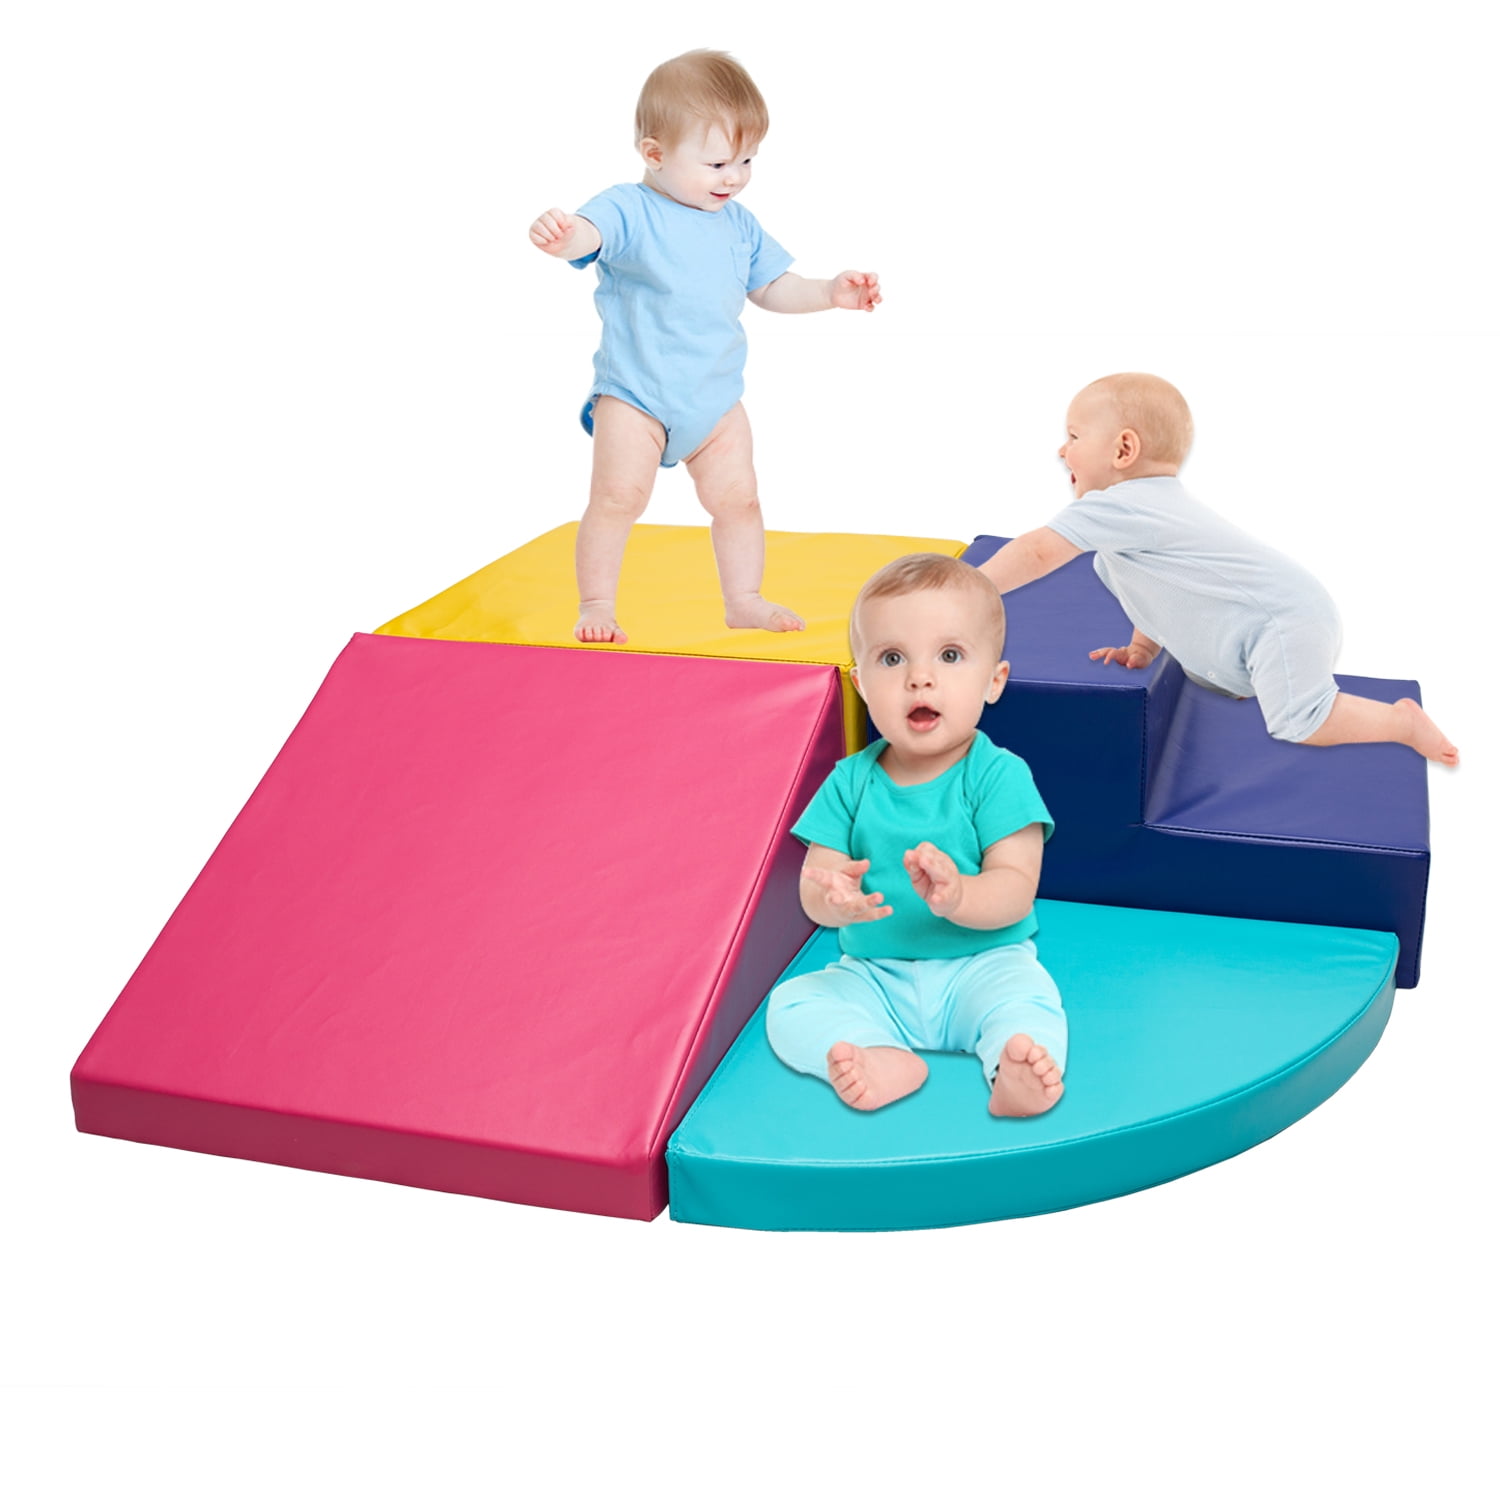 Constructive Playthings Super-Size Wood-Look Foam Blocks for Kids 